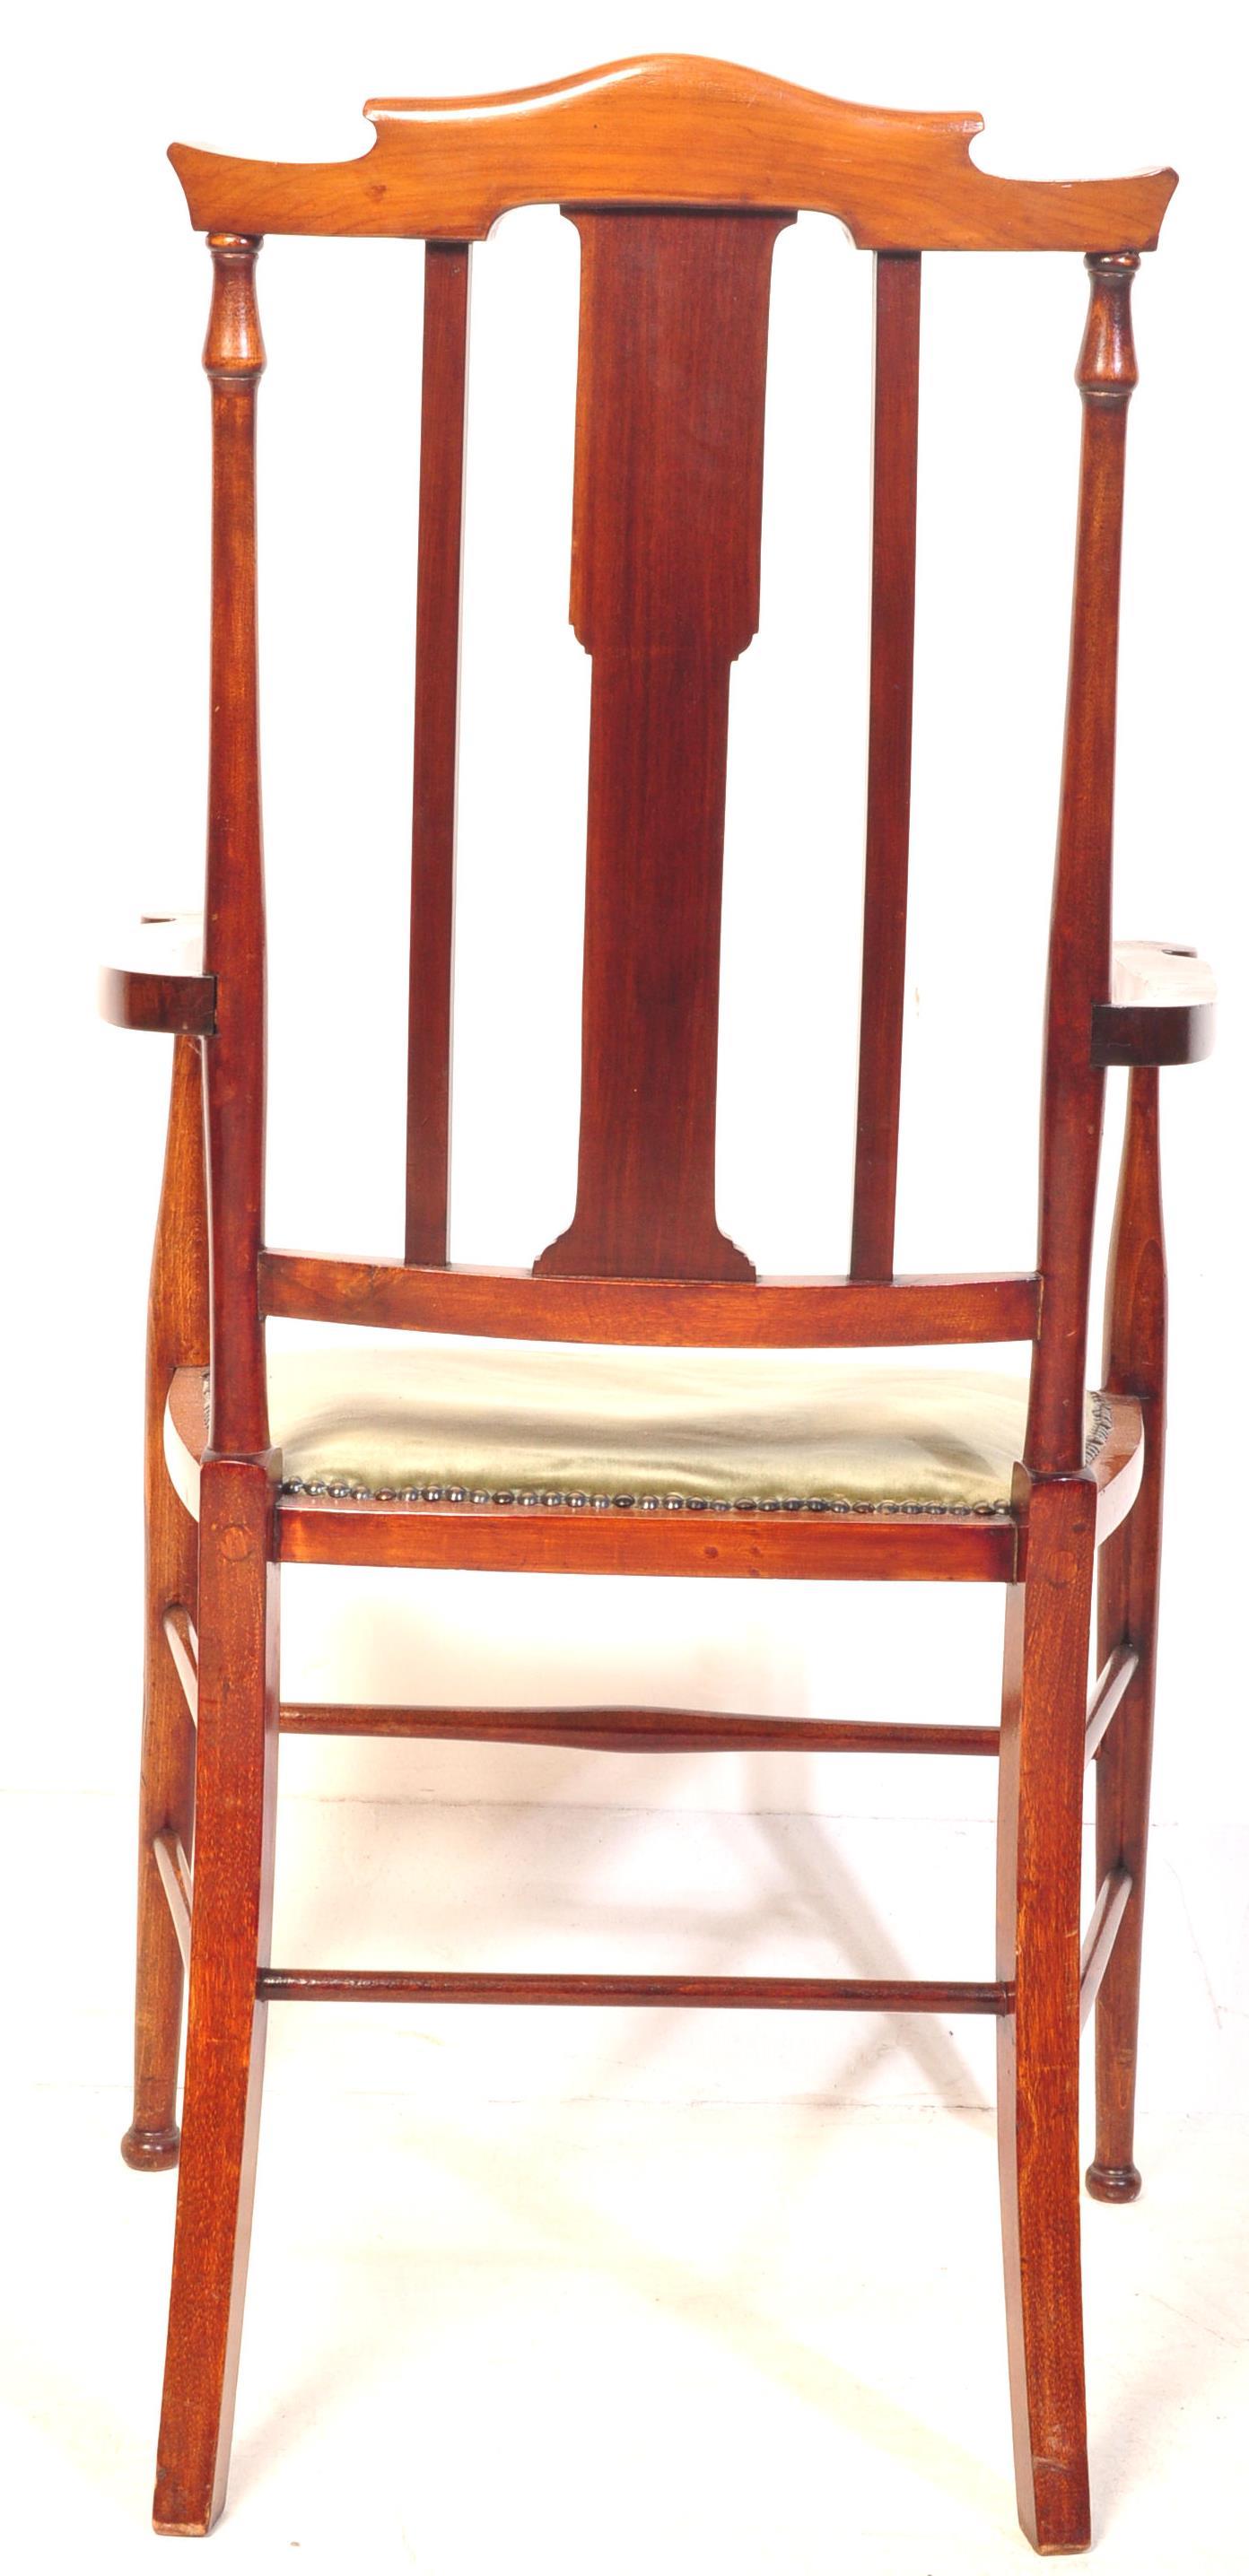 EDWARDIAN BEECH AND ELM CHAIR - Image 6 of 7